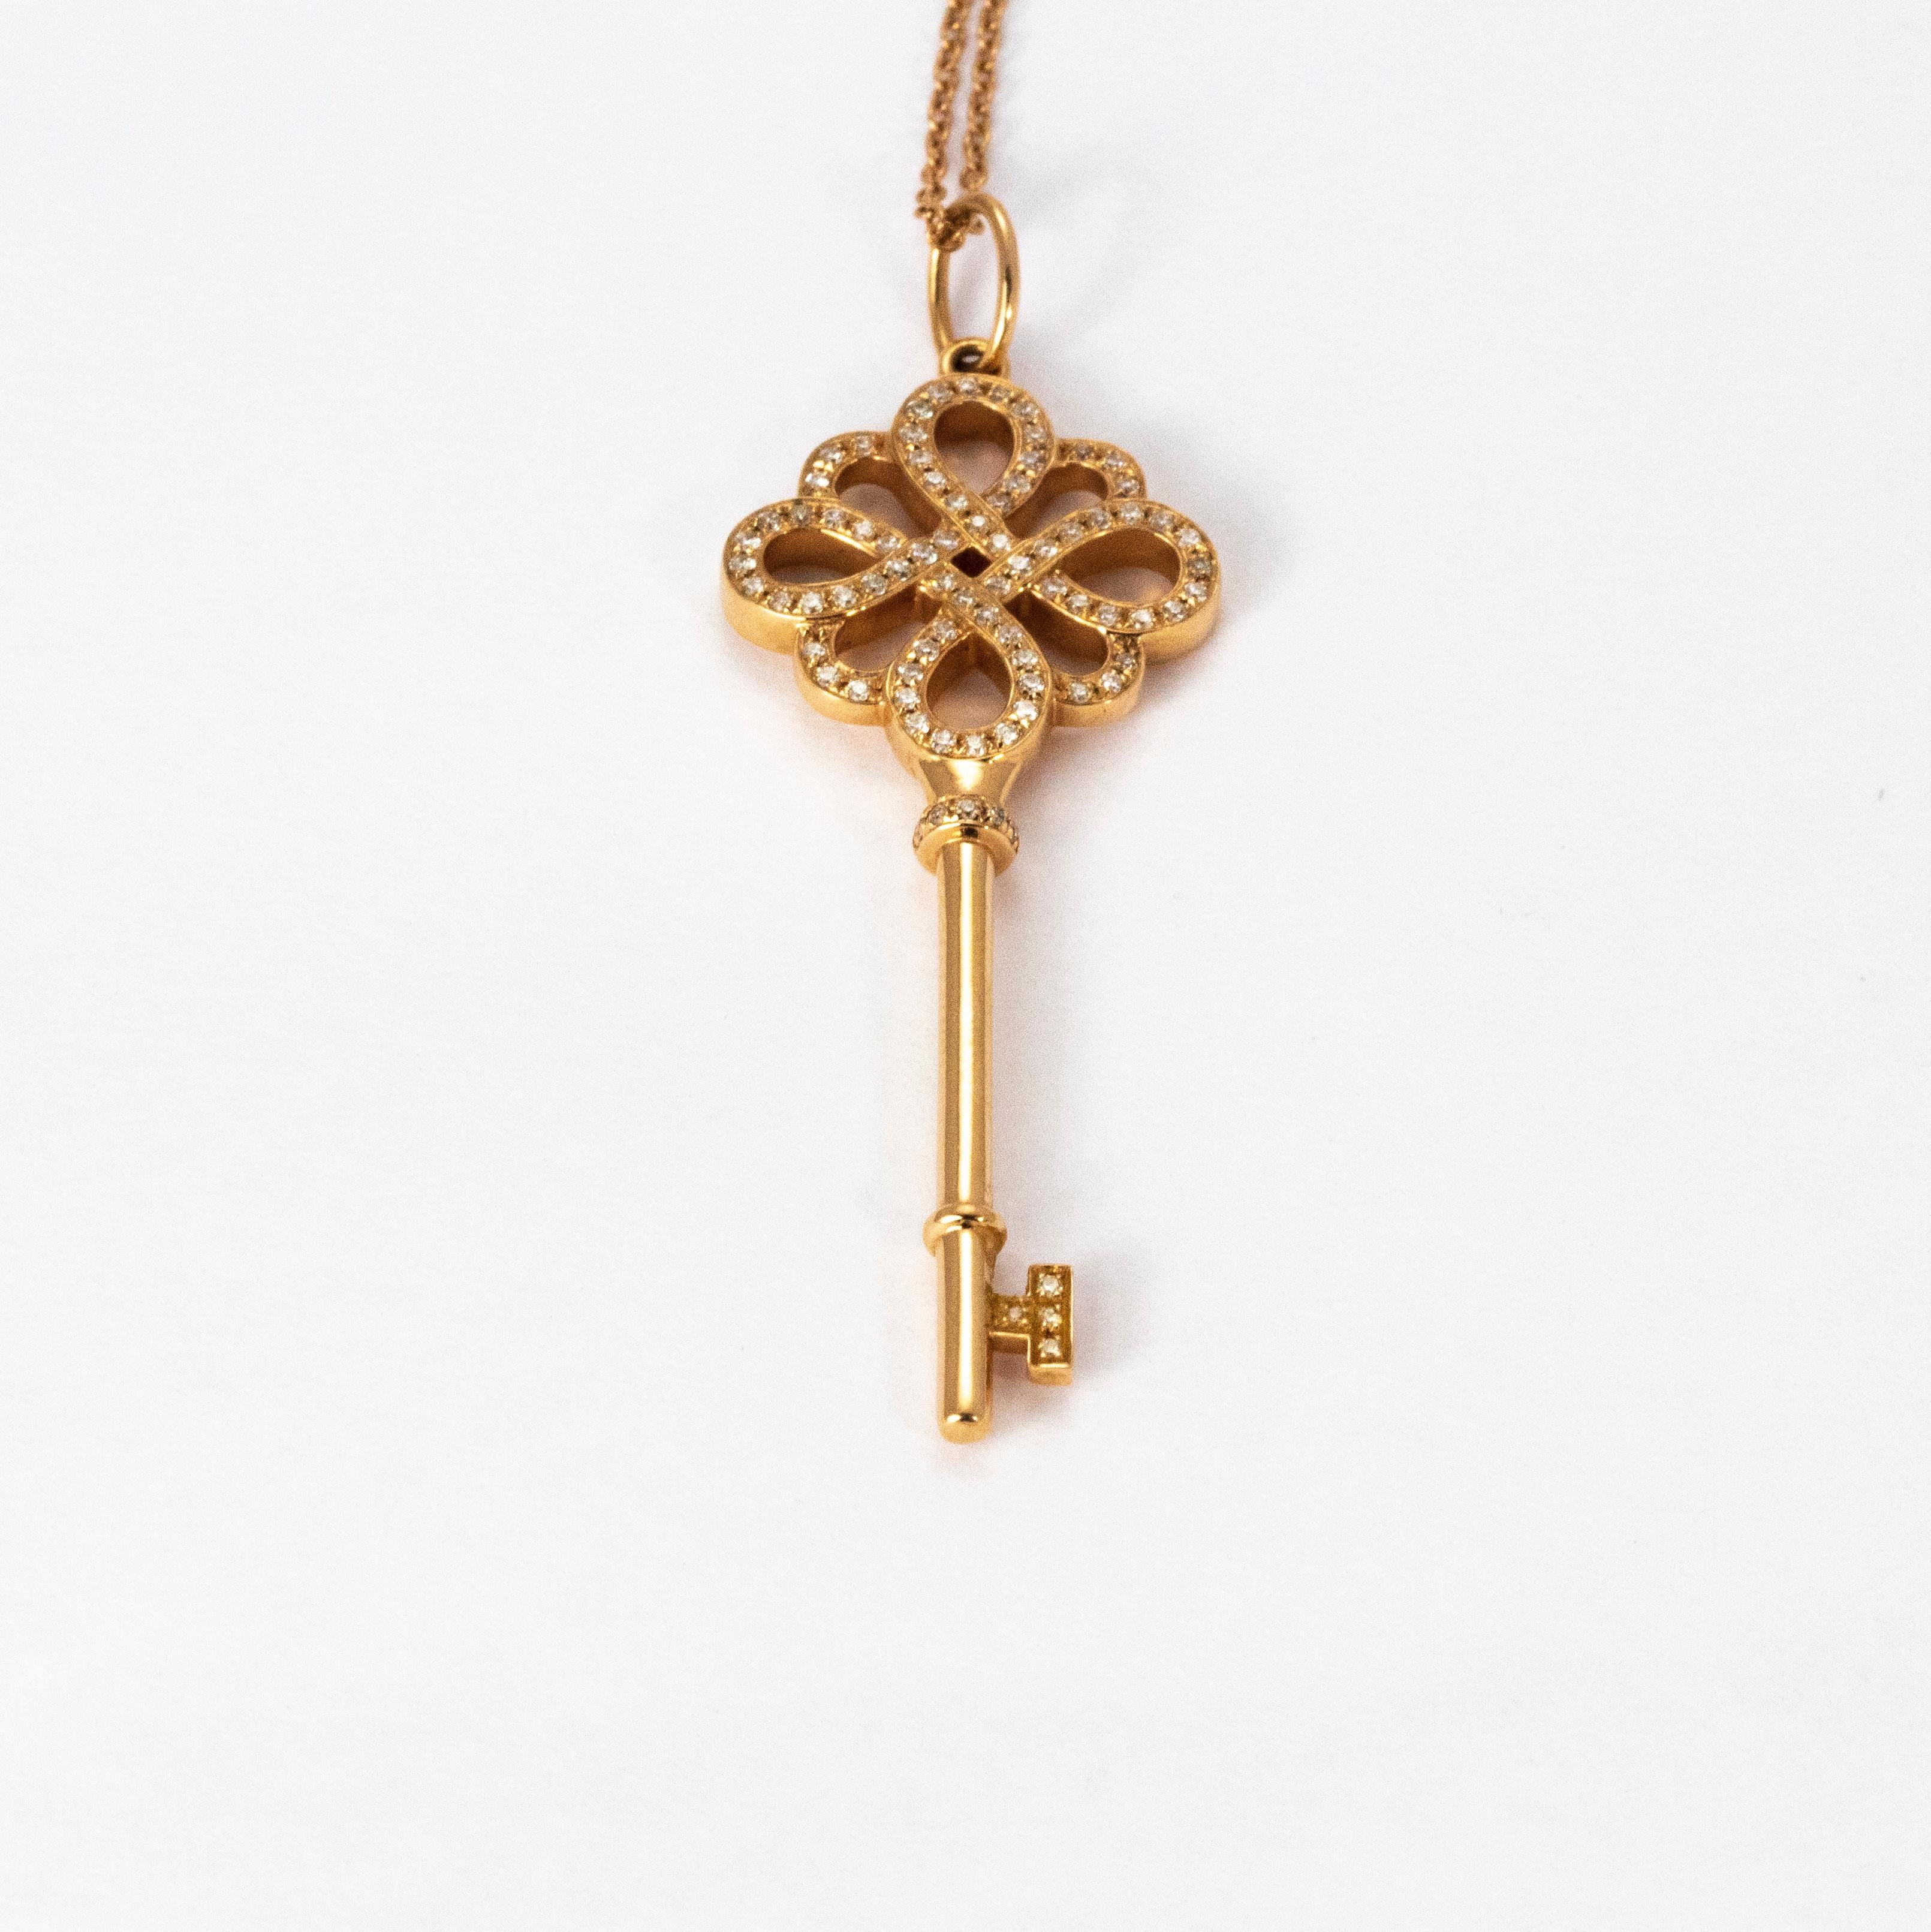 An iconic key pendant by Tiffany. The knot and teeth of the key are encrusted with round brilliant white diamonds, set in 18 Karat rose gold with chain. 

Chain length: 50 cm